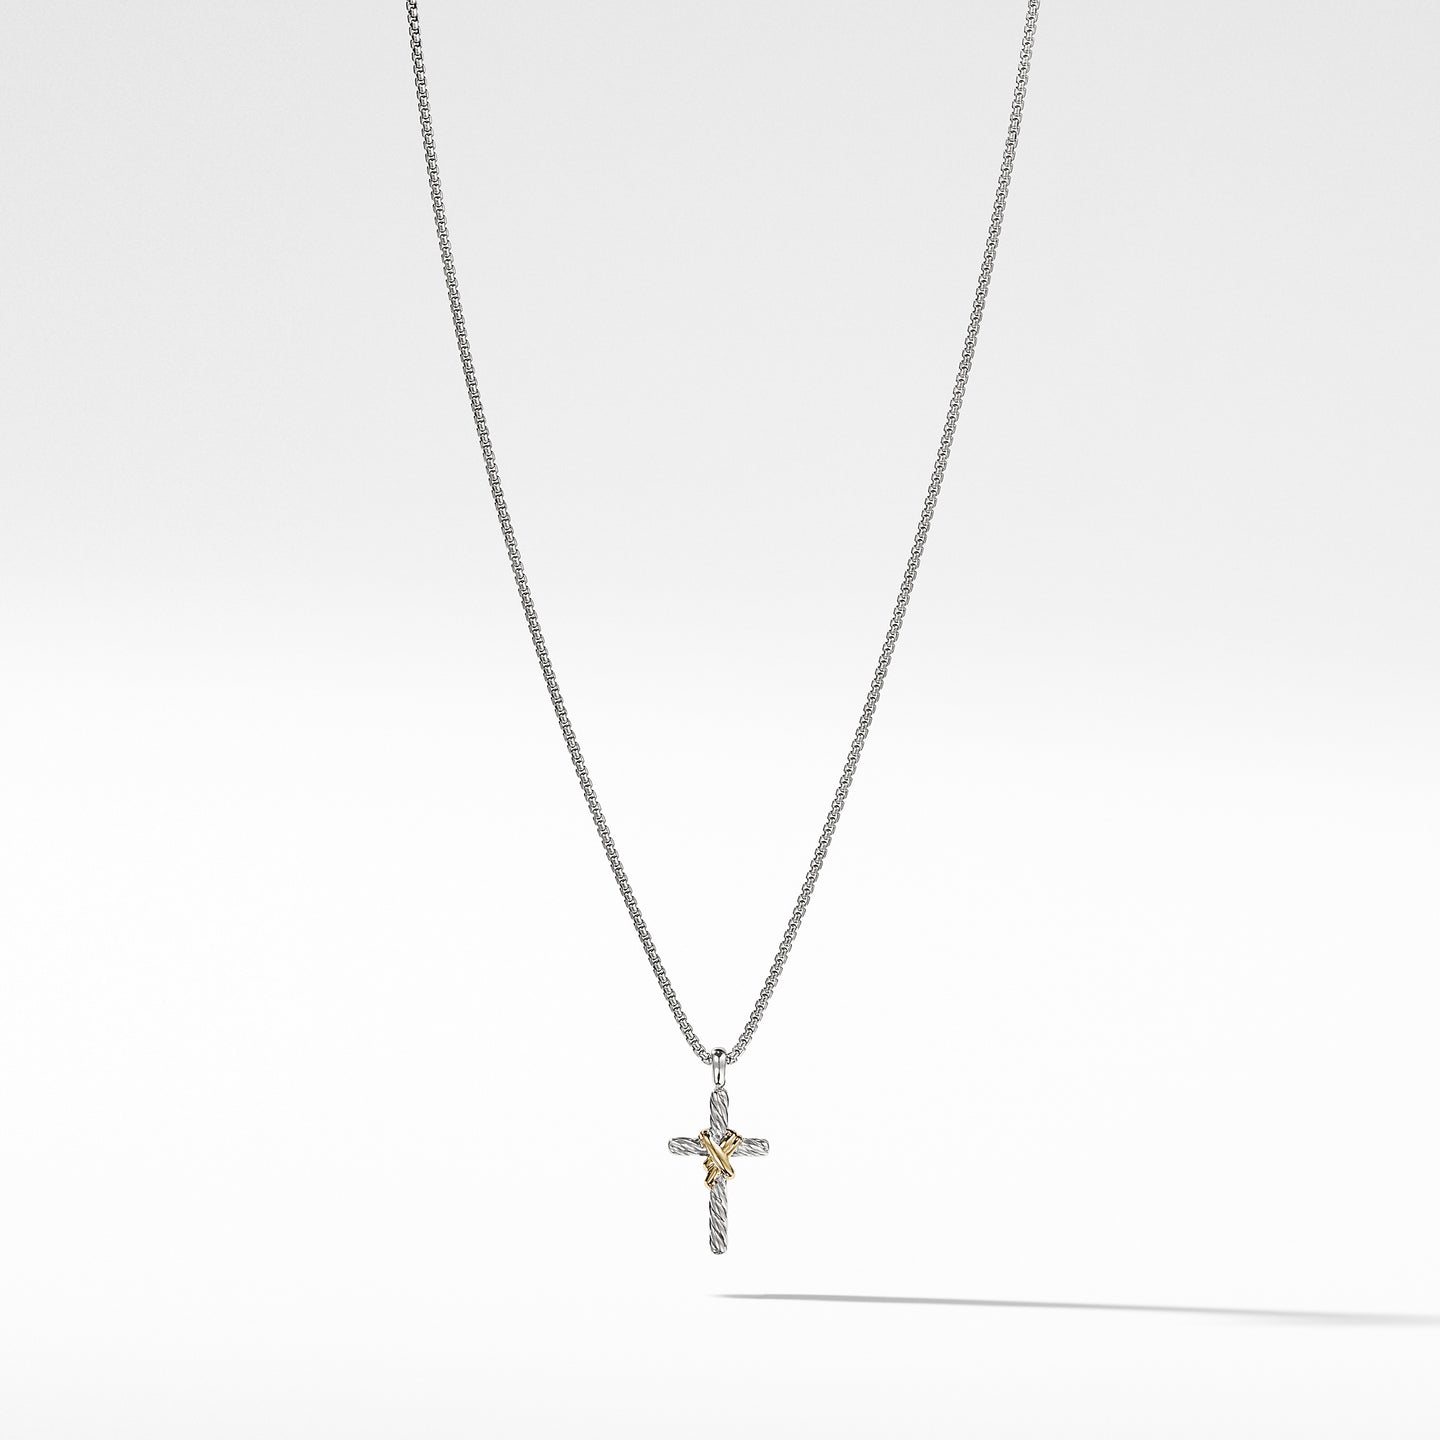 X Cross Necklace with Gold, 18